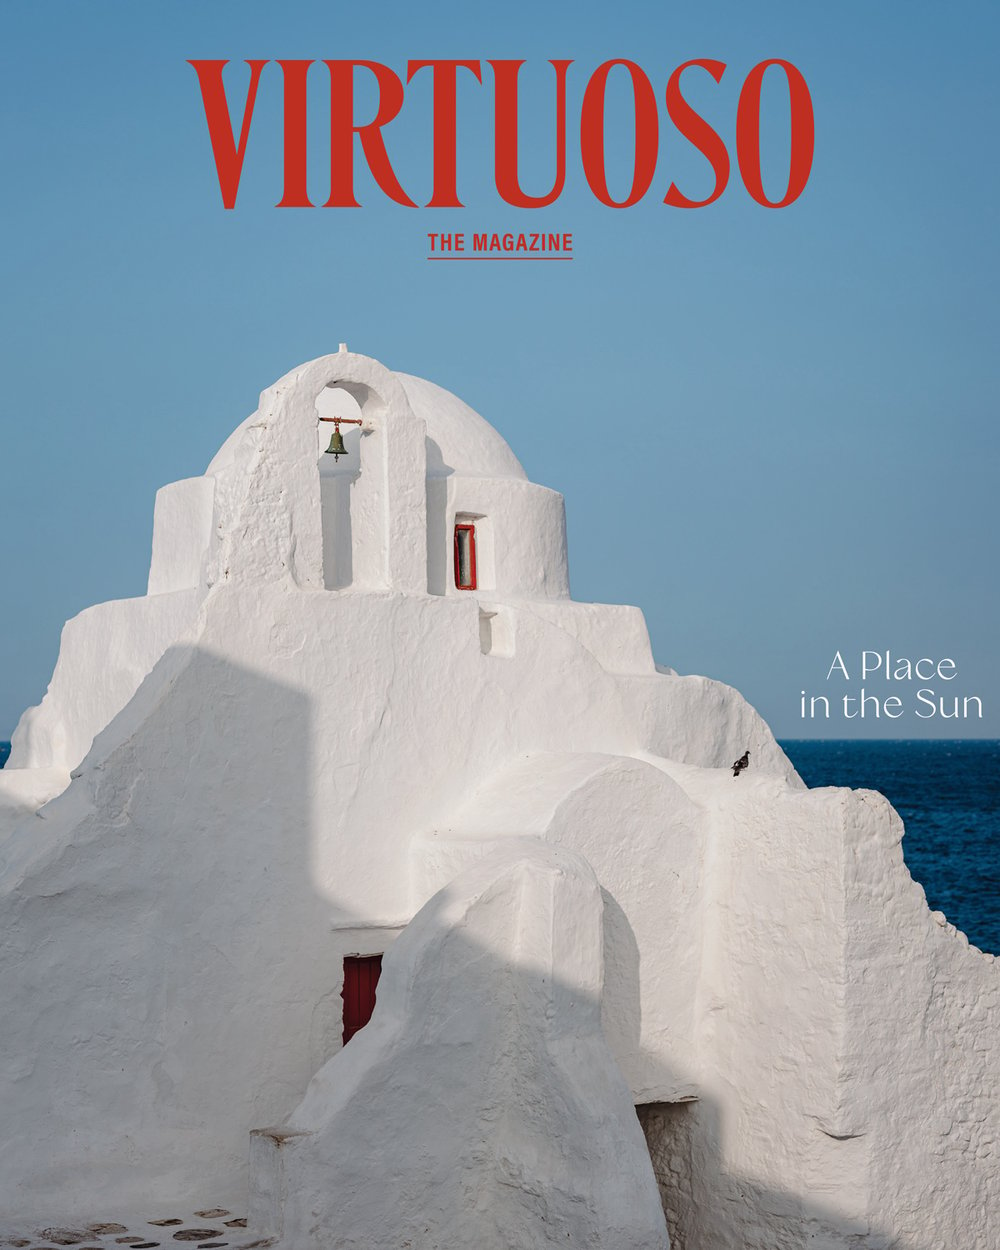 The March cover of Virtuoso, The Magazine shows a white church in Mykonos, Greece, photographed against a blue sky. The cover line reads “A place in the sun.”